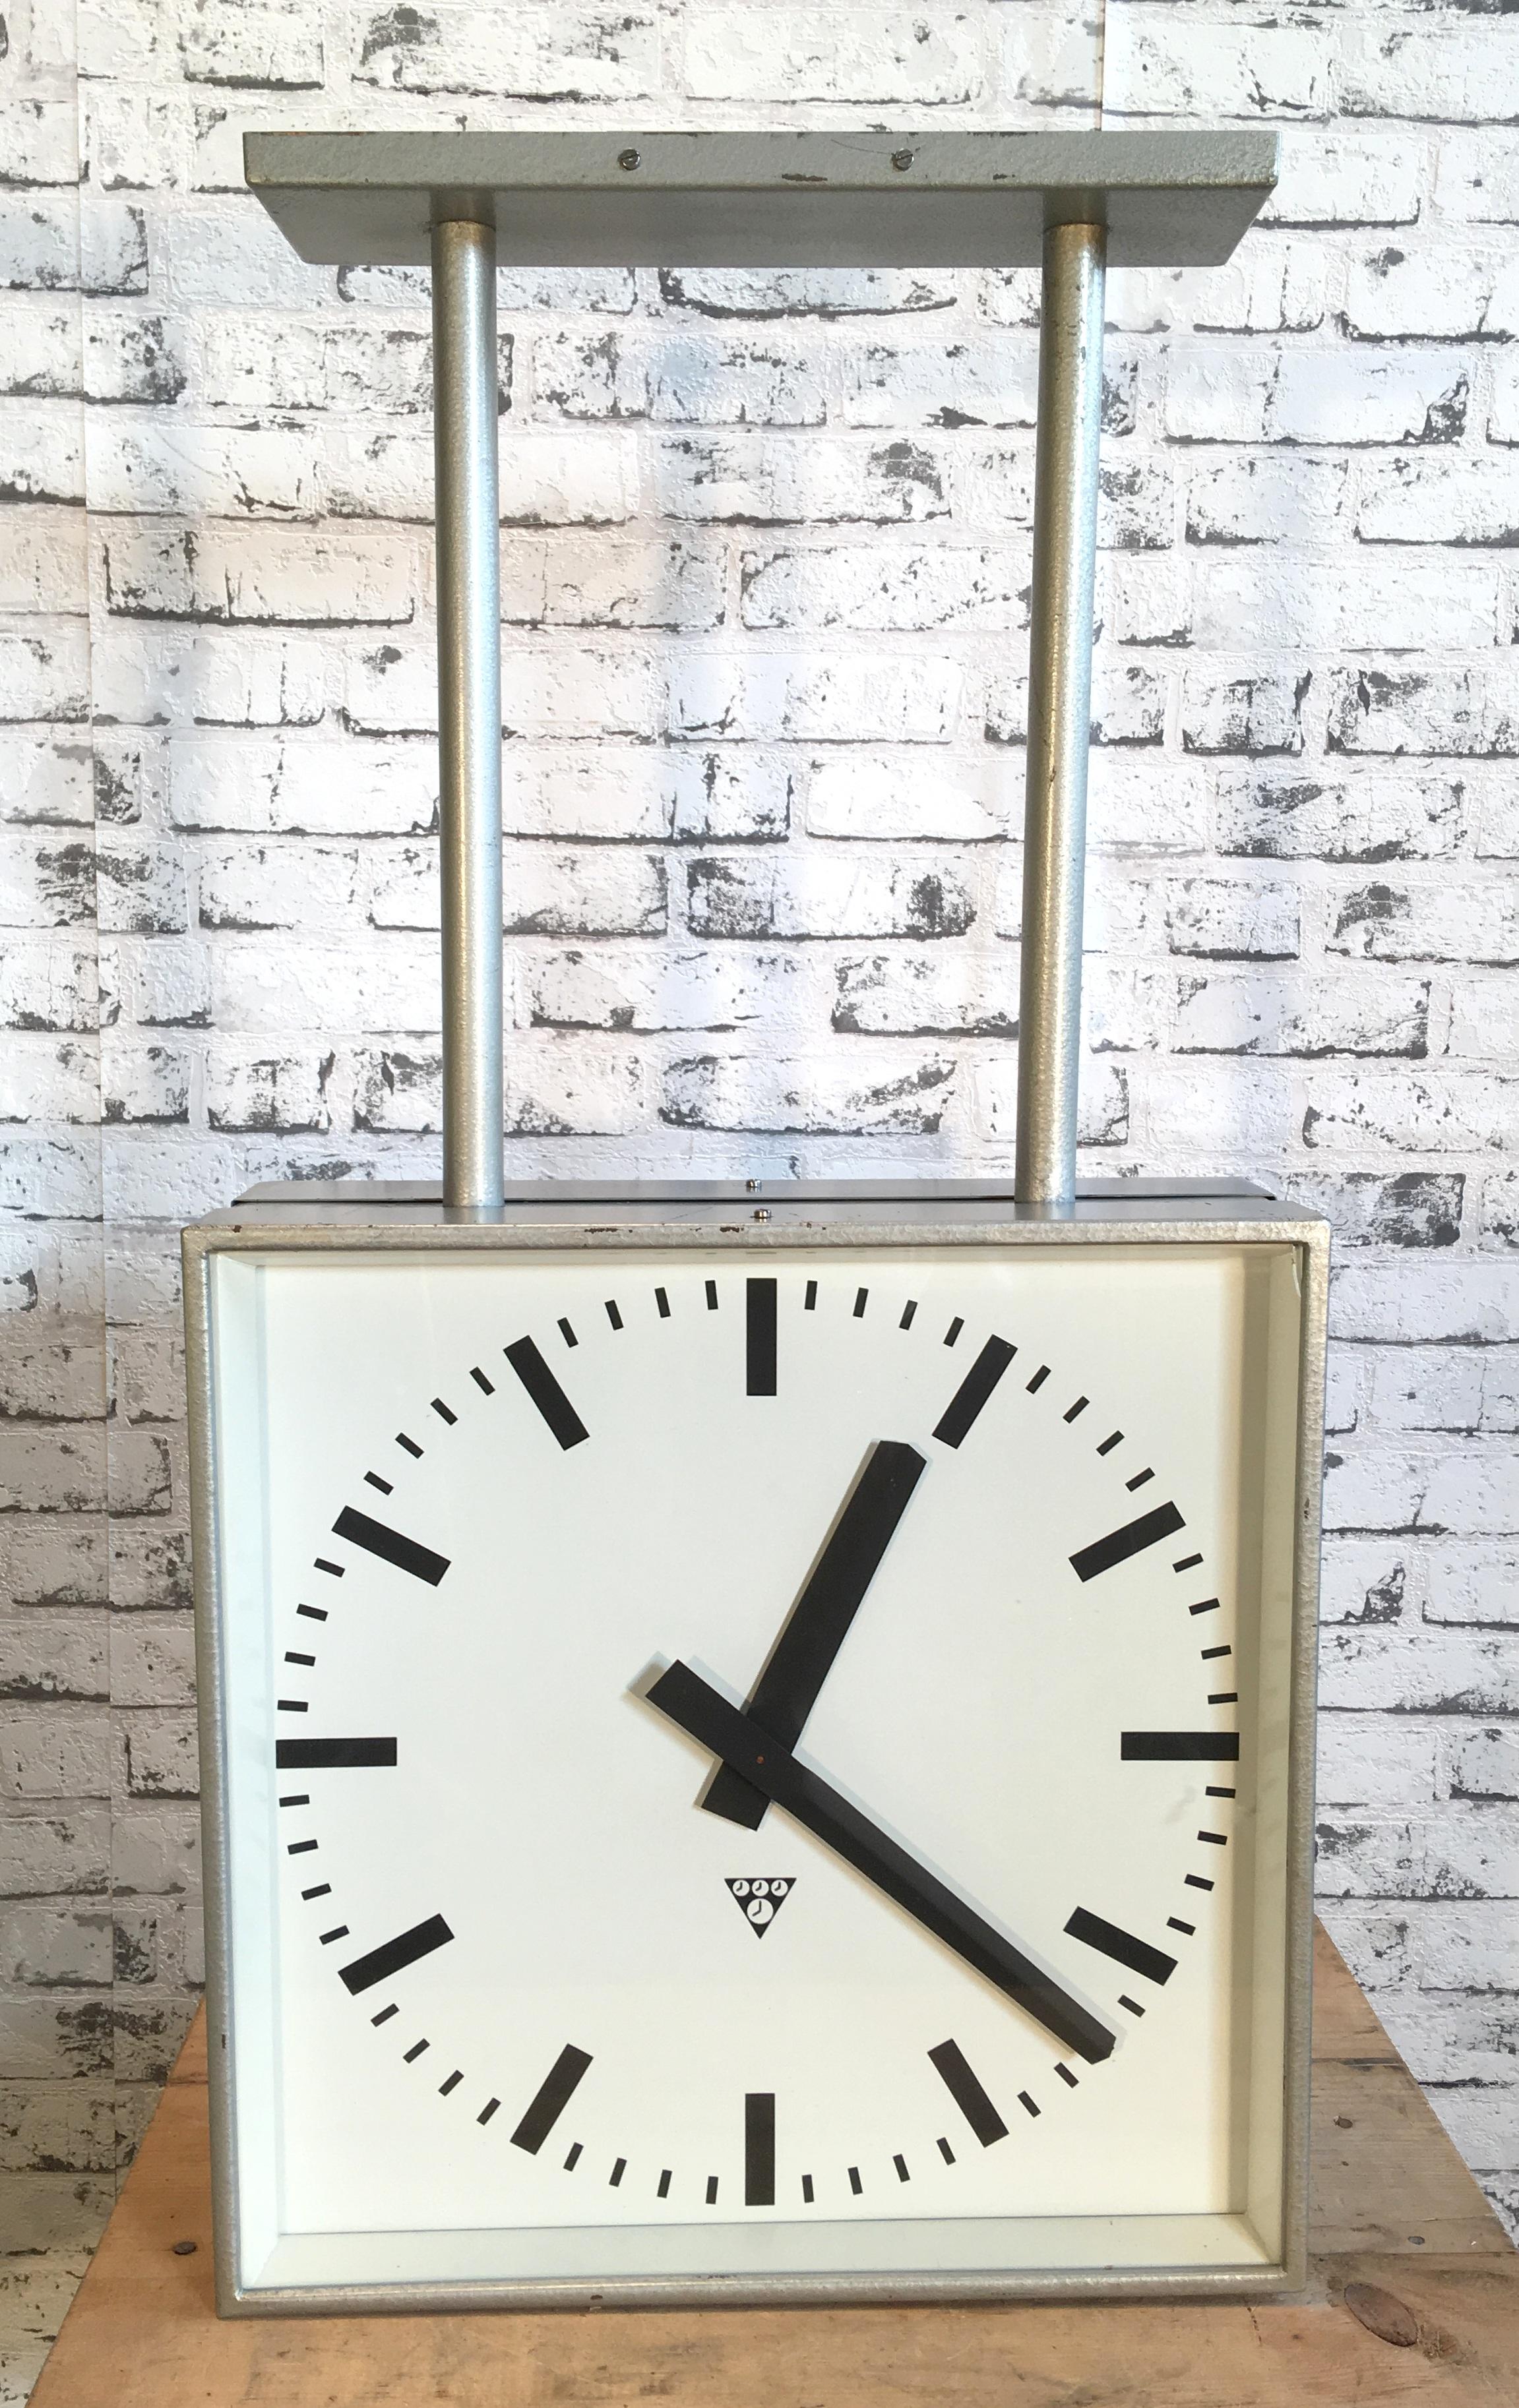 This square double sided railway, school or factory clock was produced by Pragotron, in former Czechoslovakia, during the 1960s. The piece features a grey metal body, clear glass cover ,aluminum dial and hands. The clock has been converted into a